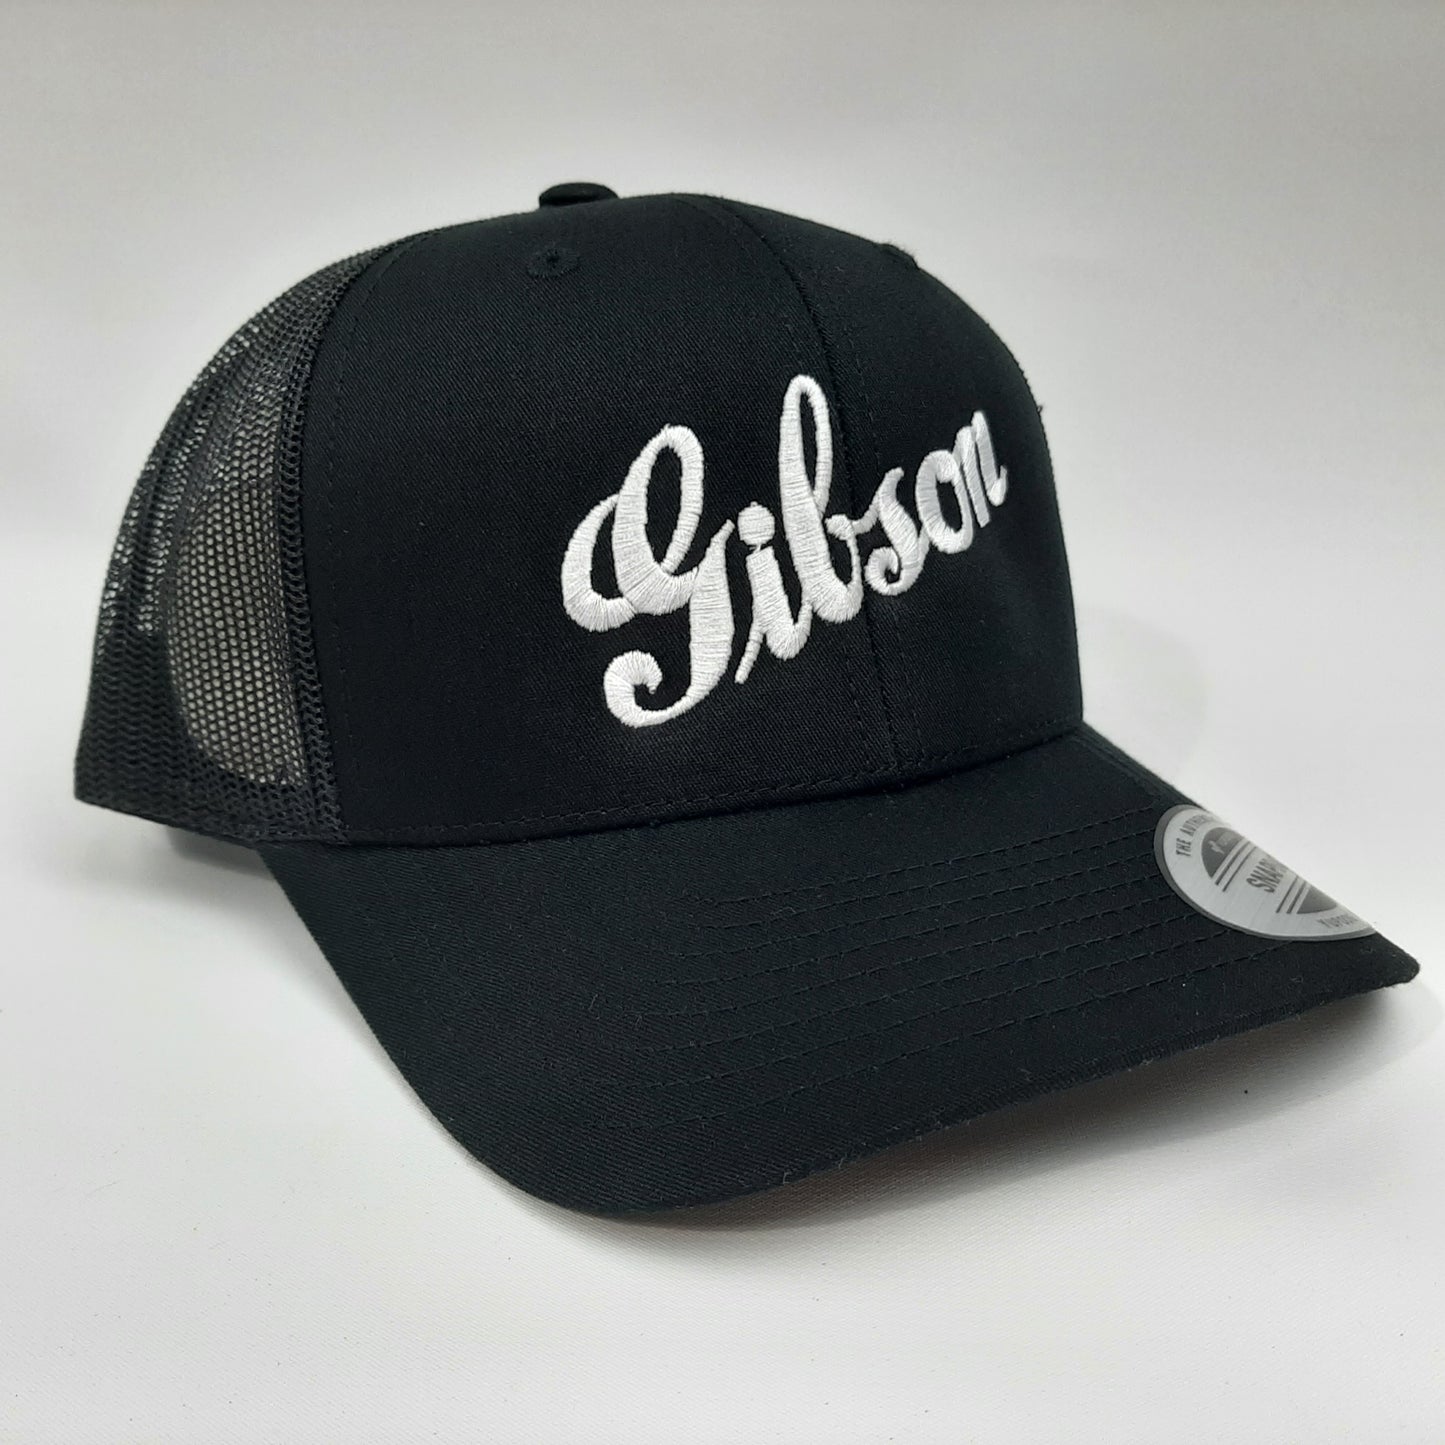 Gibson curved bill embroidered mesh snapback cap hat black